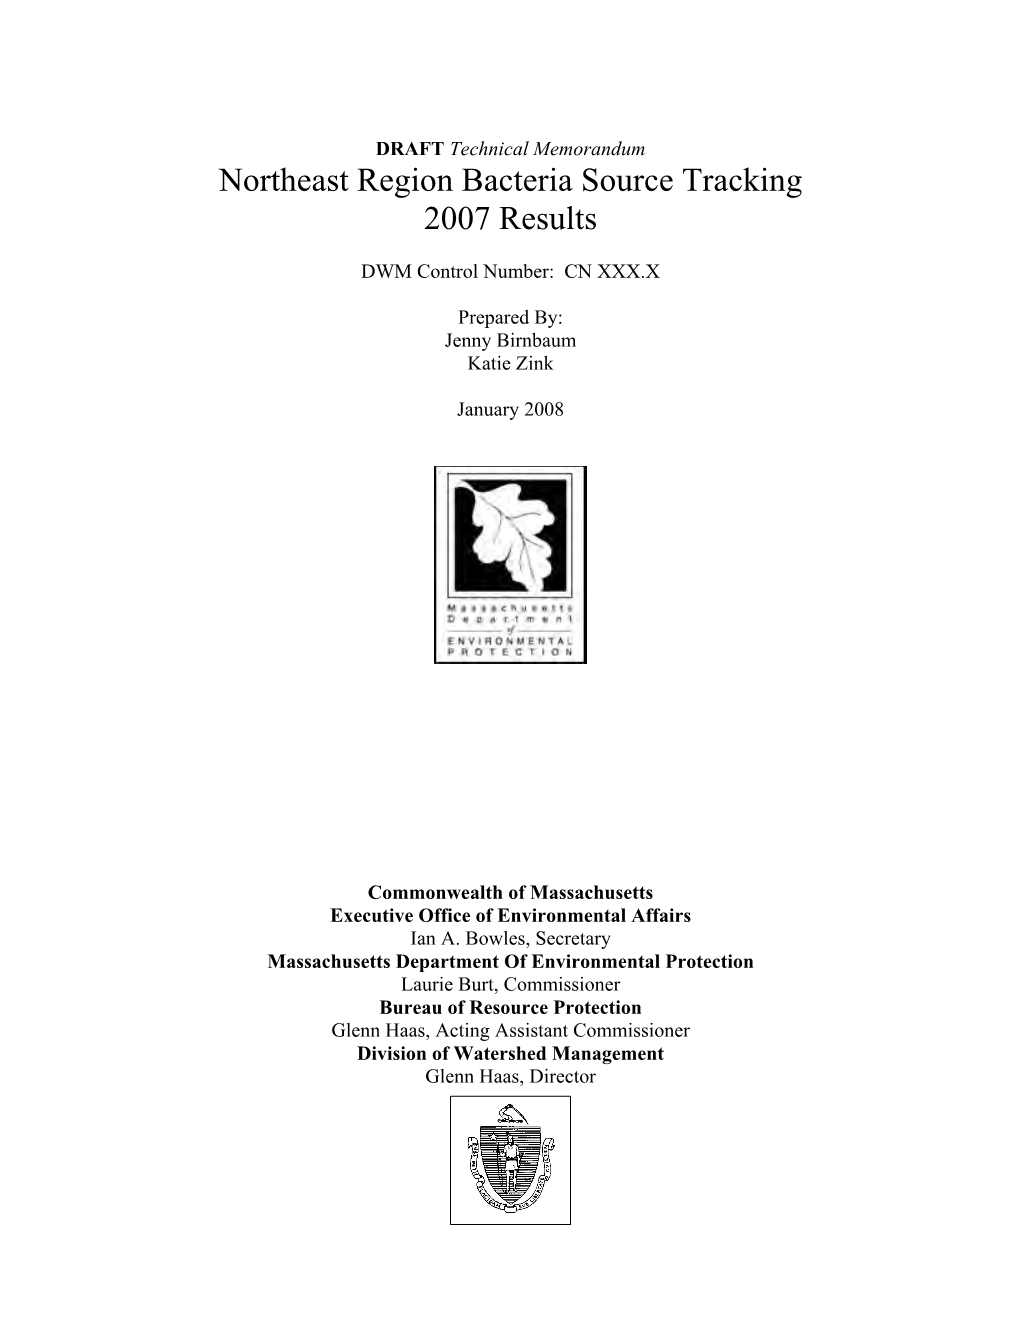 Northeast Region Bacteria Source Tracking 2007 Results